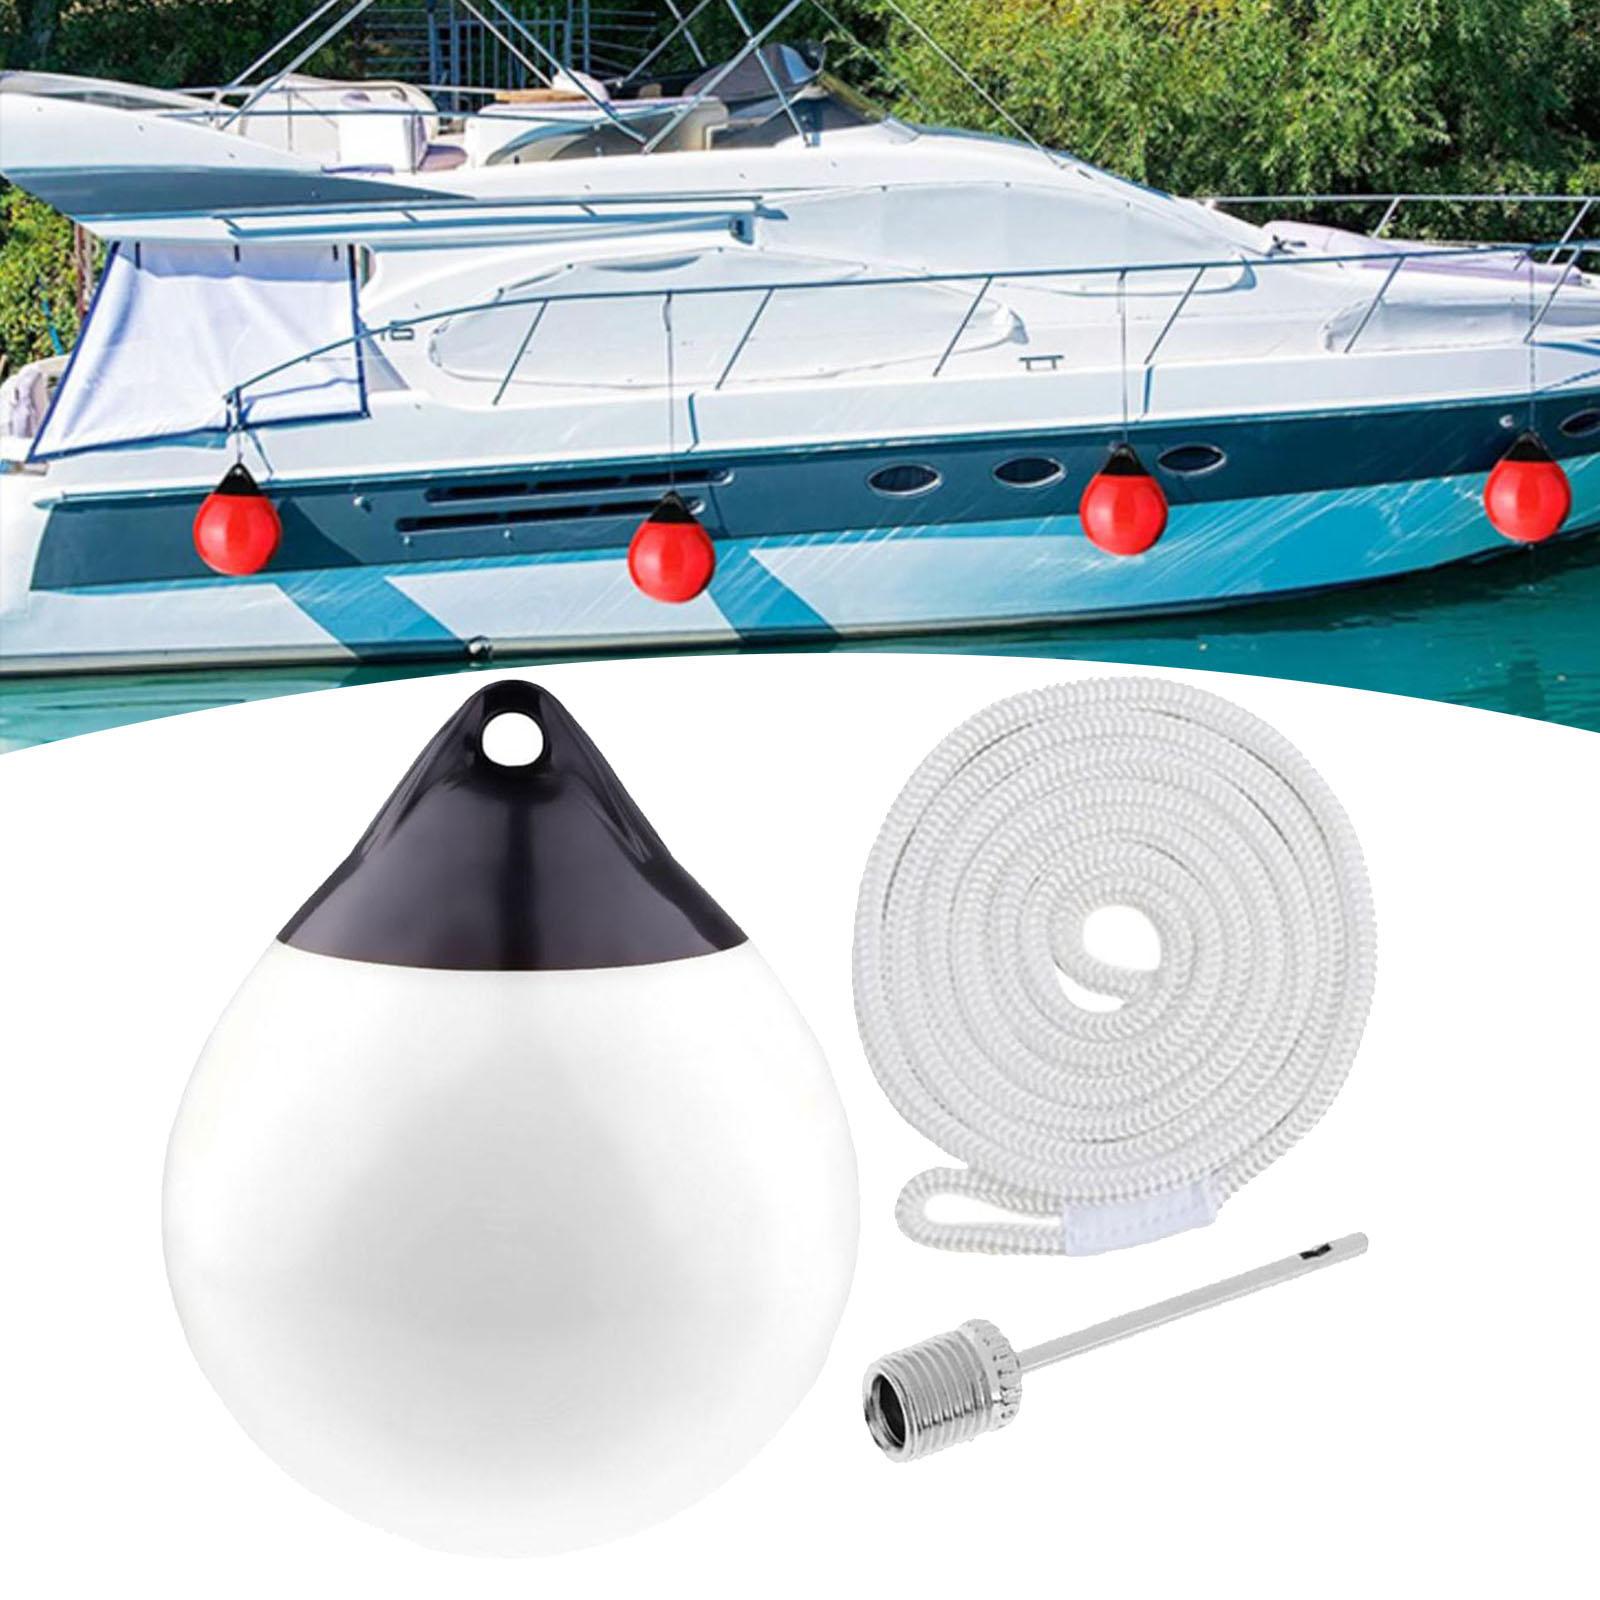 Boat Fender Ball Dock Edge Docking Anchor Buoy for Yacht Sailboats Row Boats White w White Rope